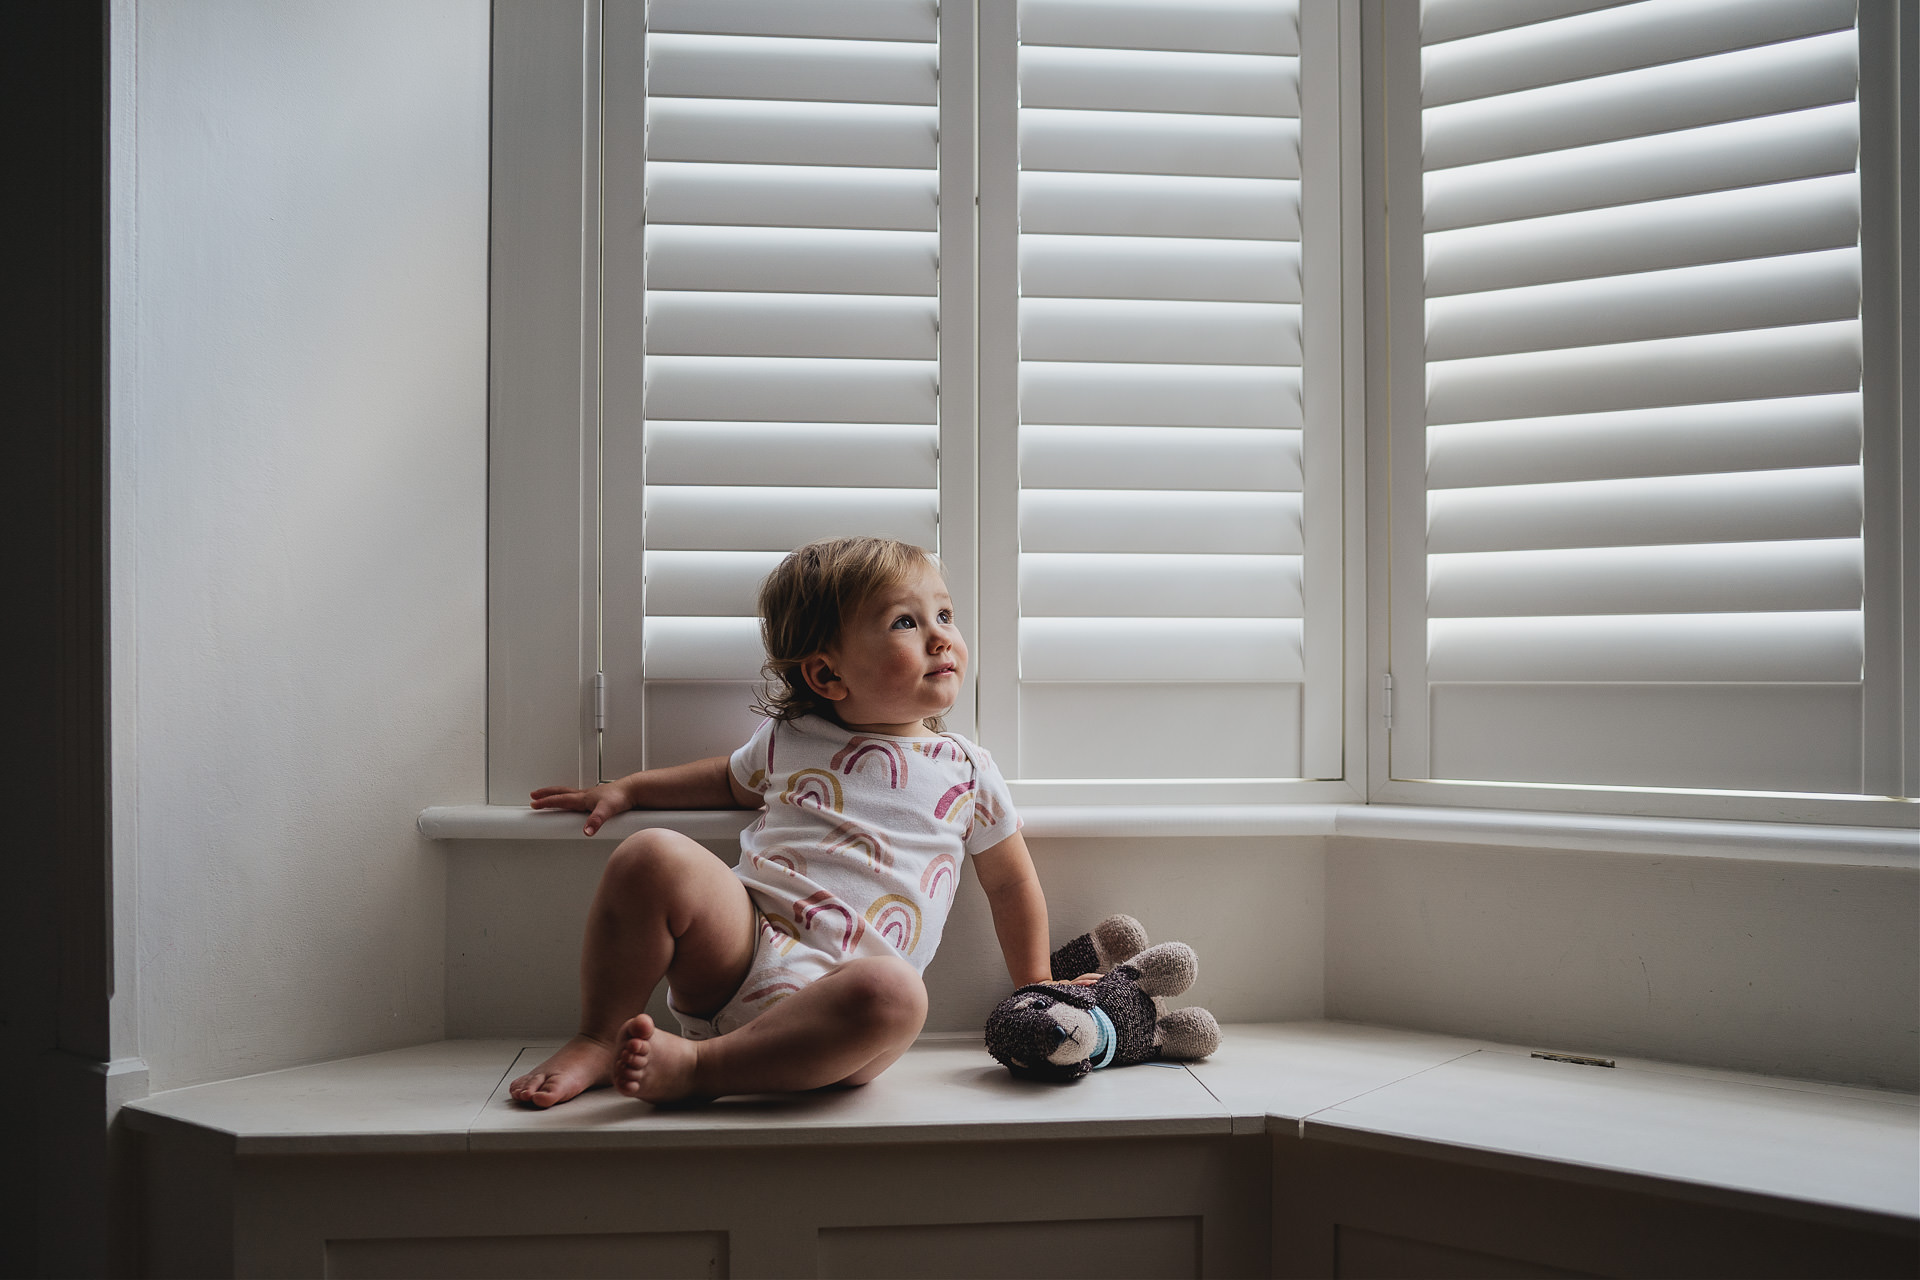 Best Devon family photography: a toddler sitting on a window ledge with a toy